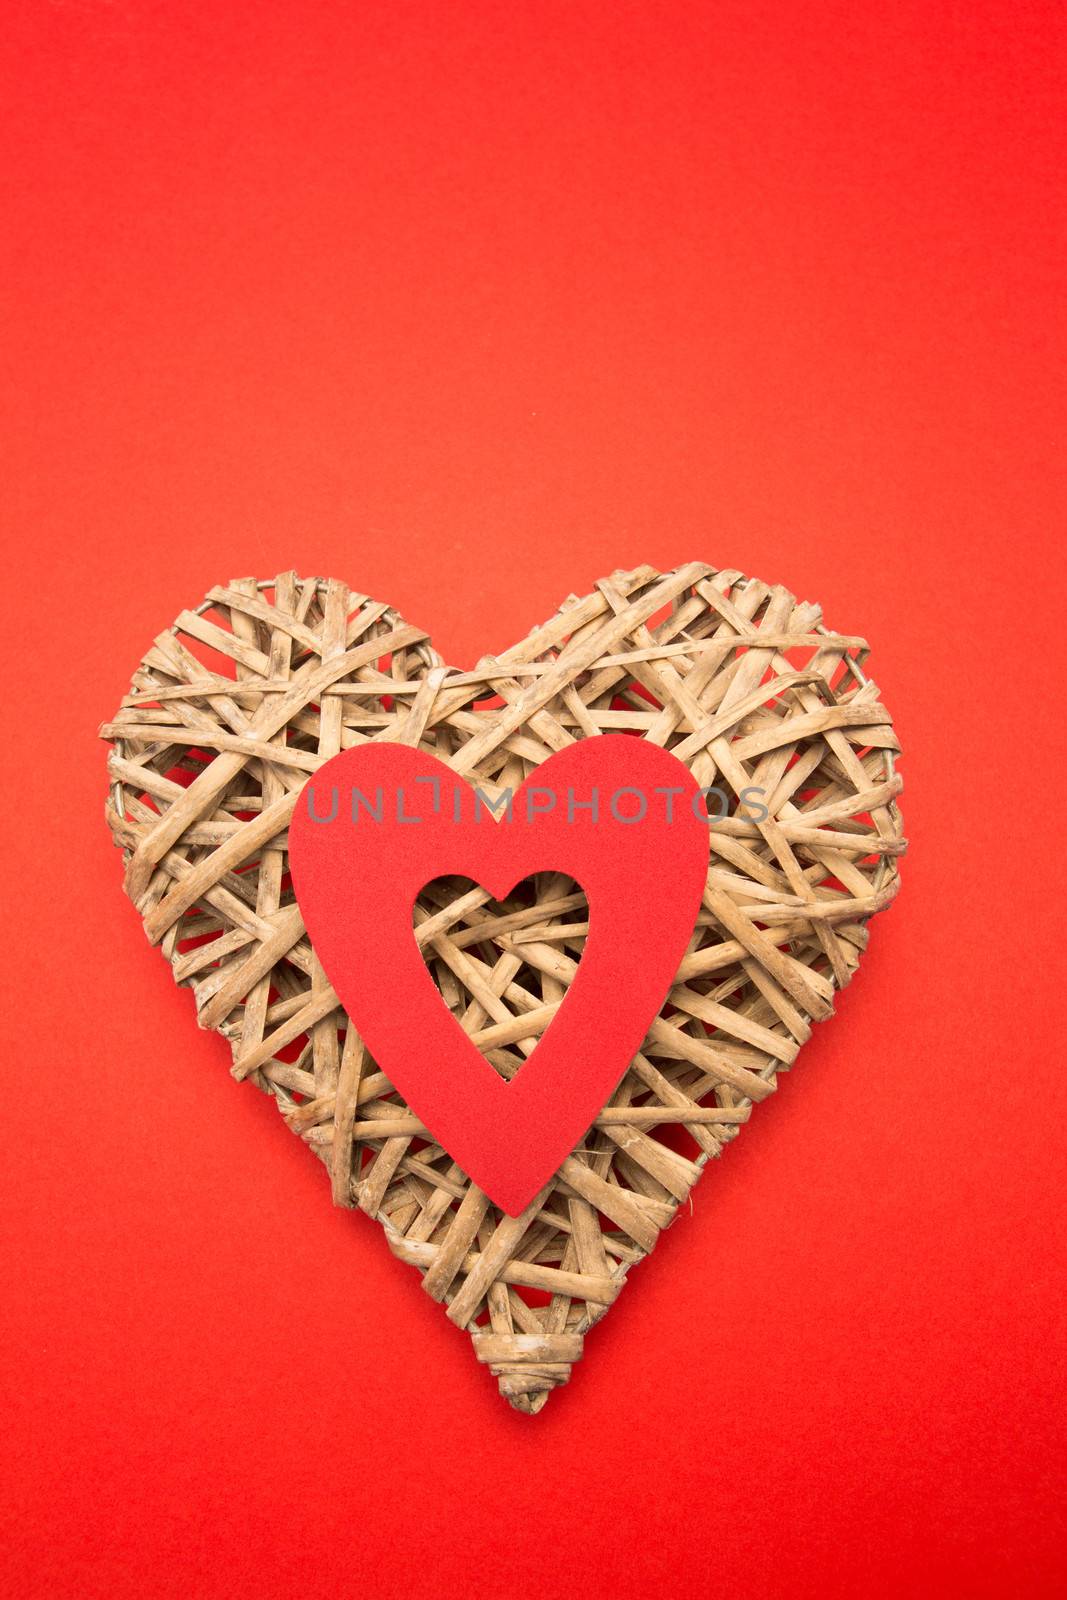 Wicker heart ornament with red cut out by Wavebreakmedia